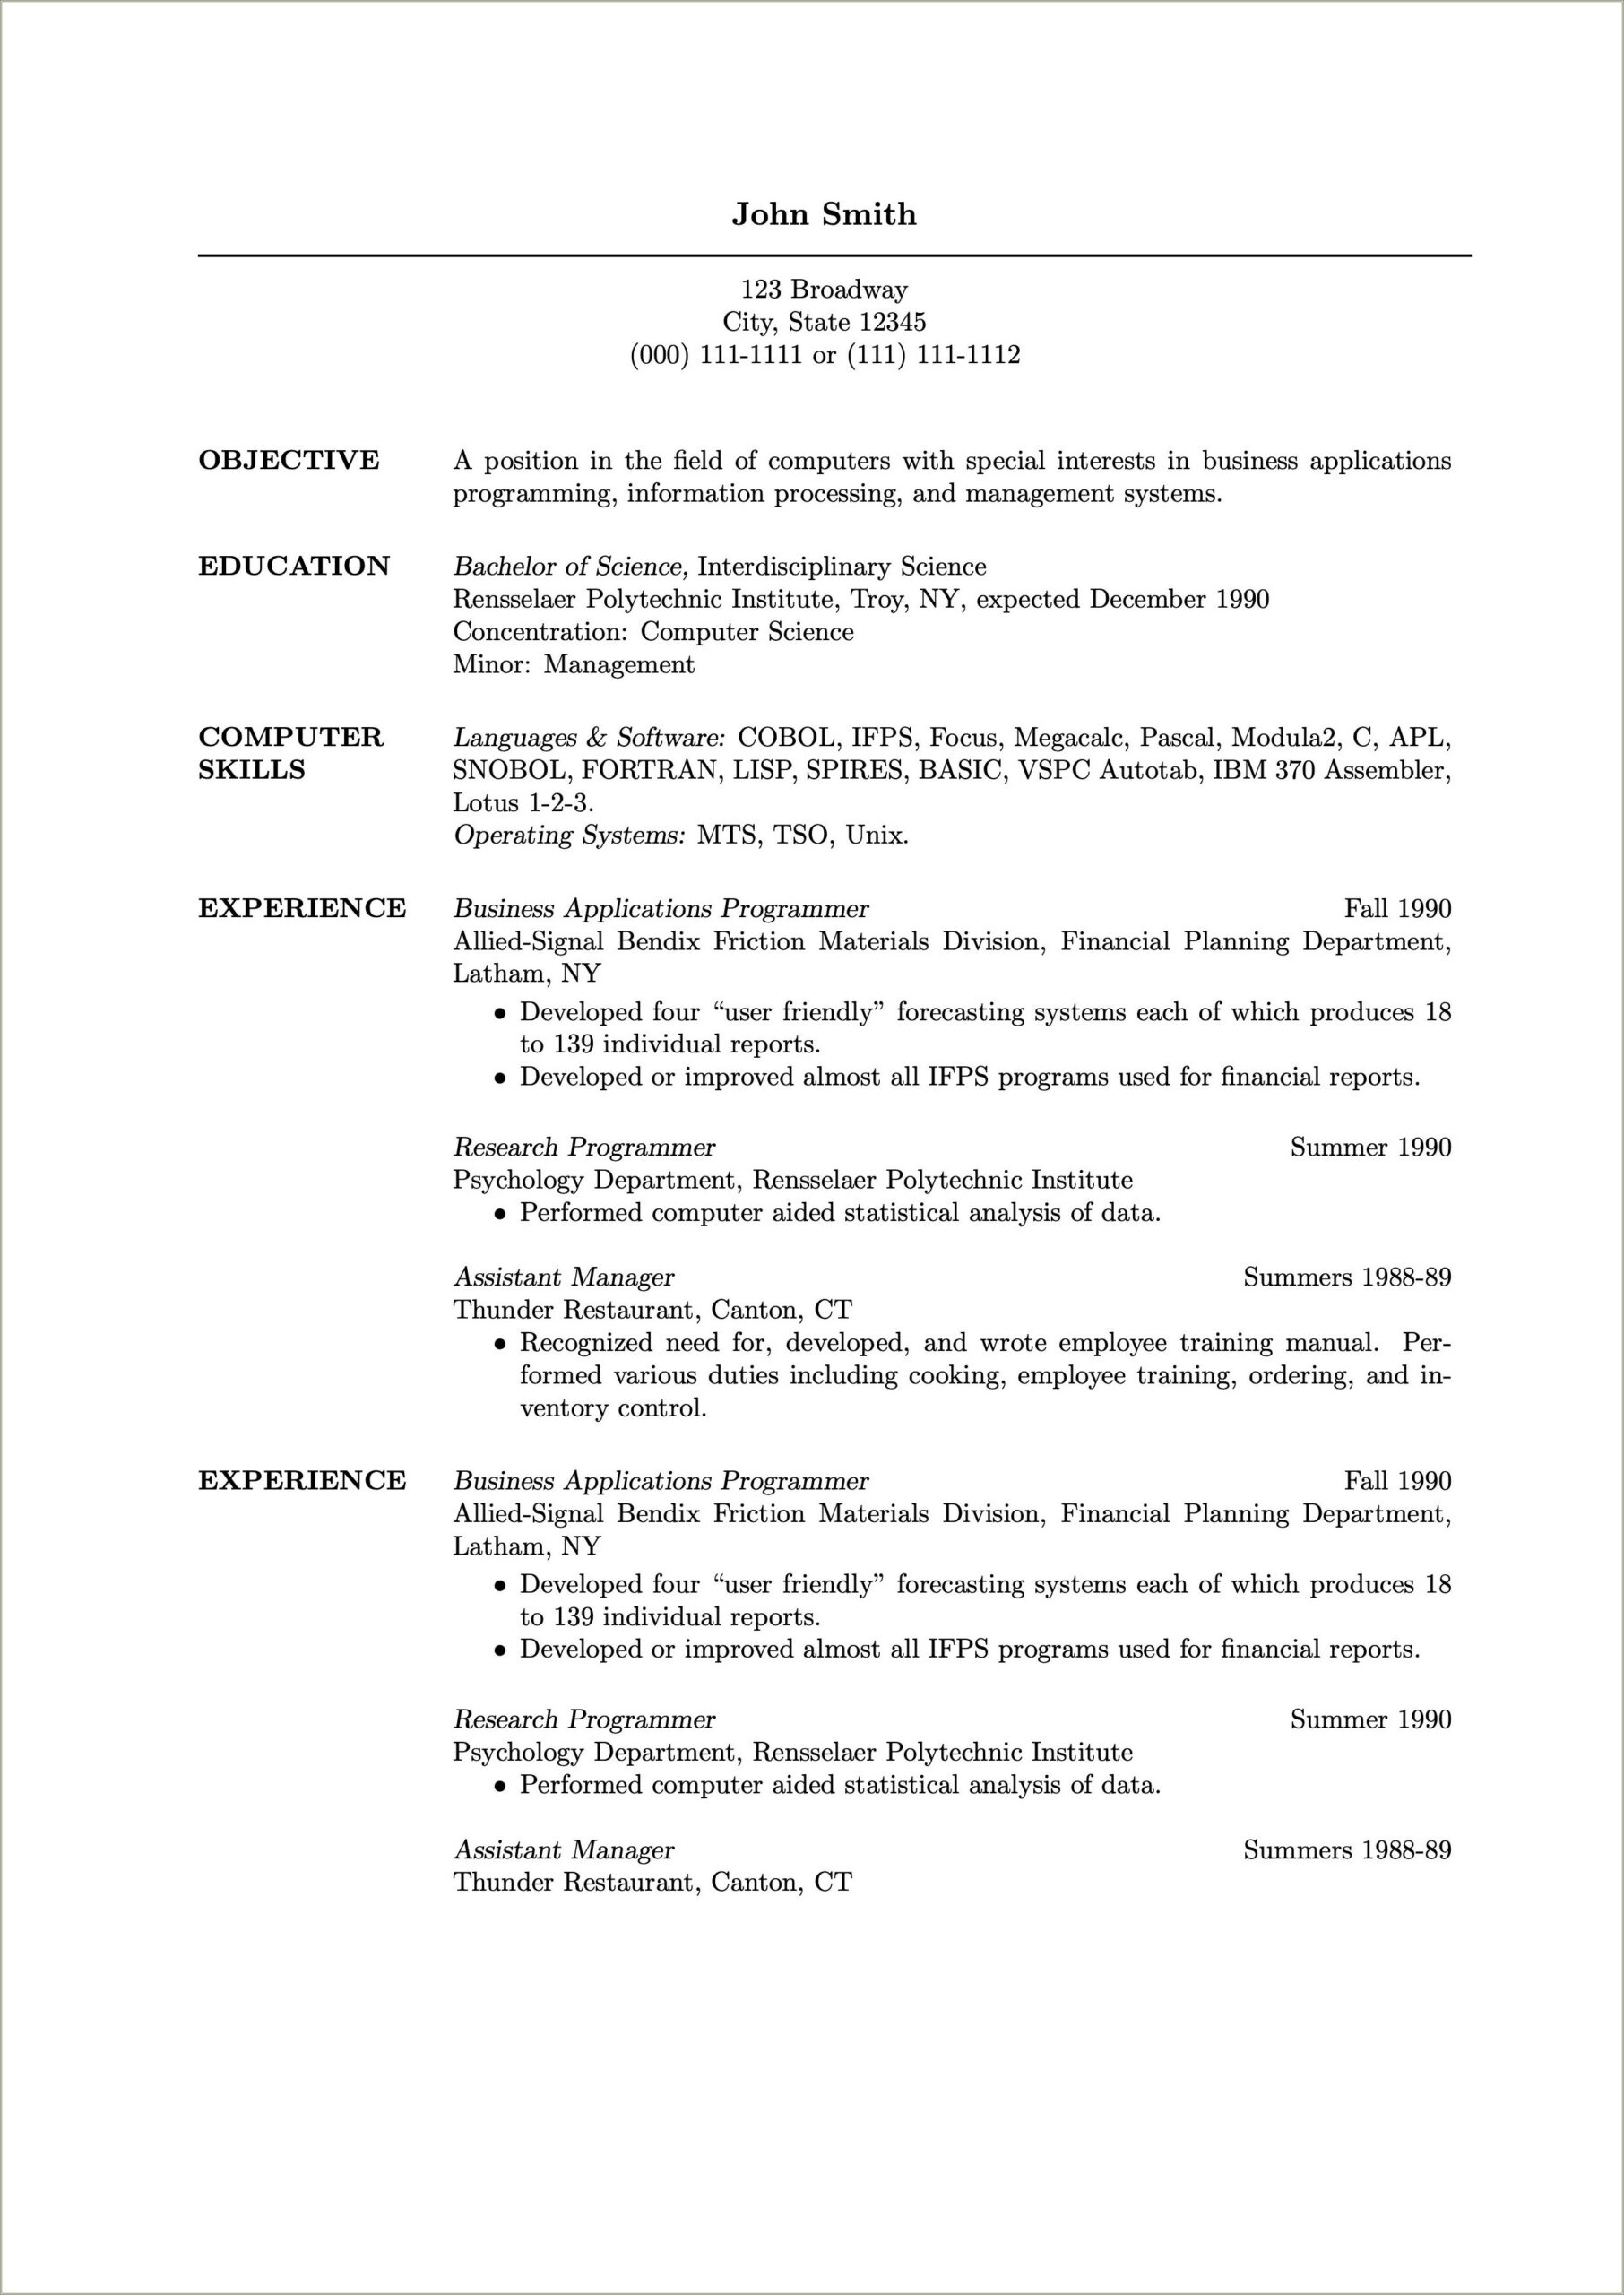 Sample Resume With One Company Multiple Positions